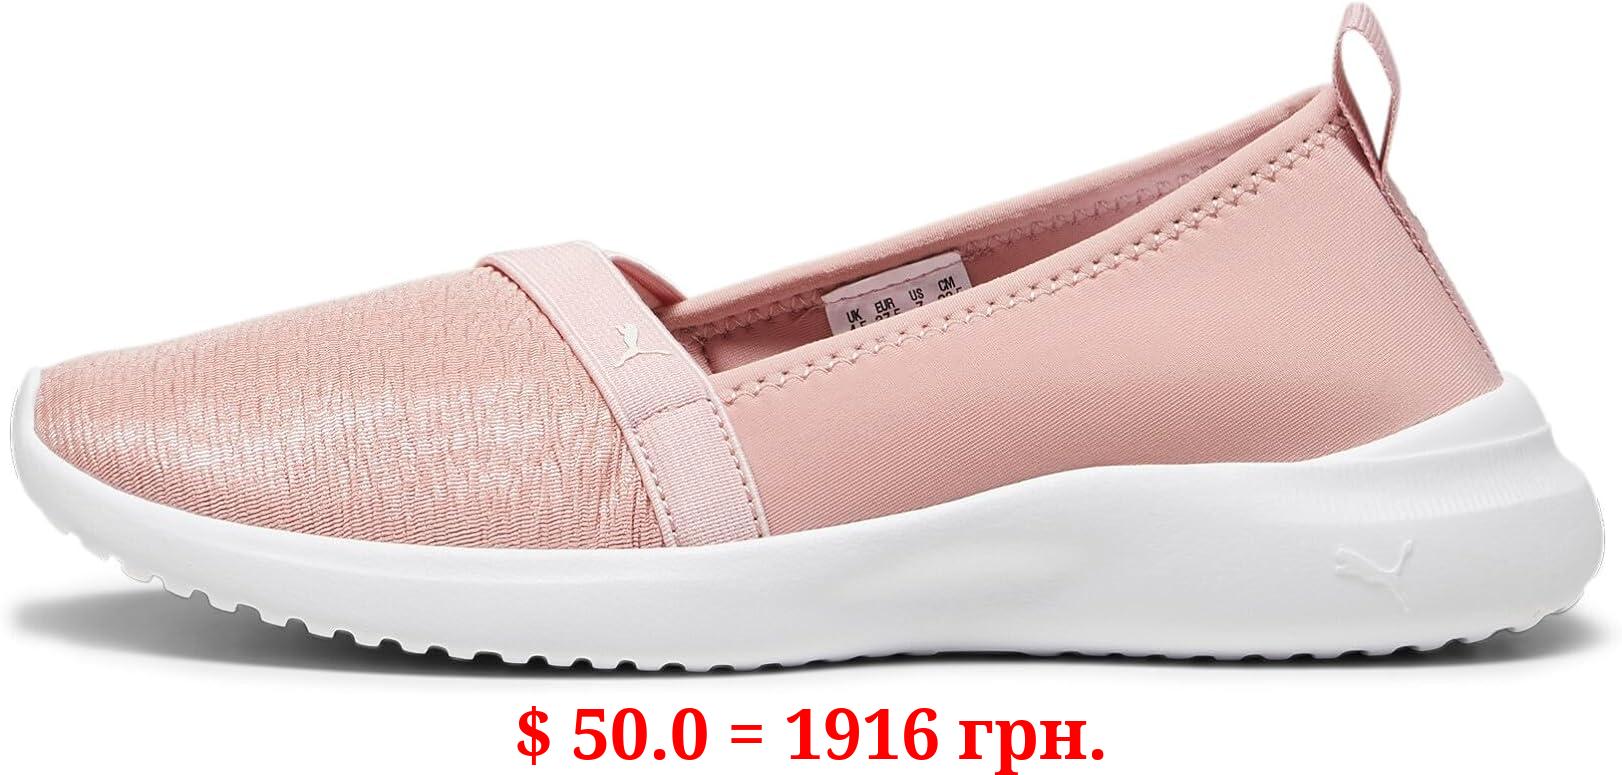 PUMA Women's ADELINA Sneaker, Future Pink-Frosted Ivory-PUMA White, 8.5